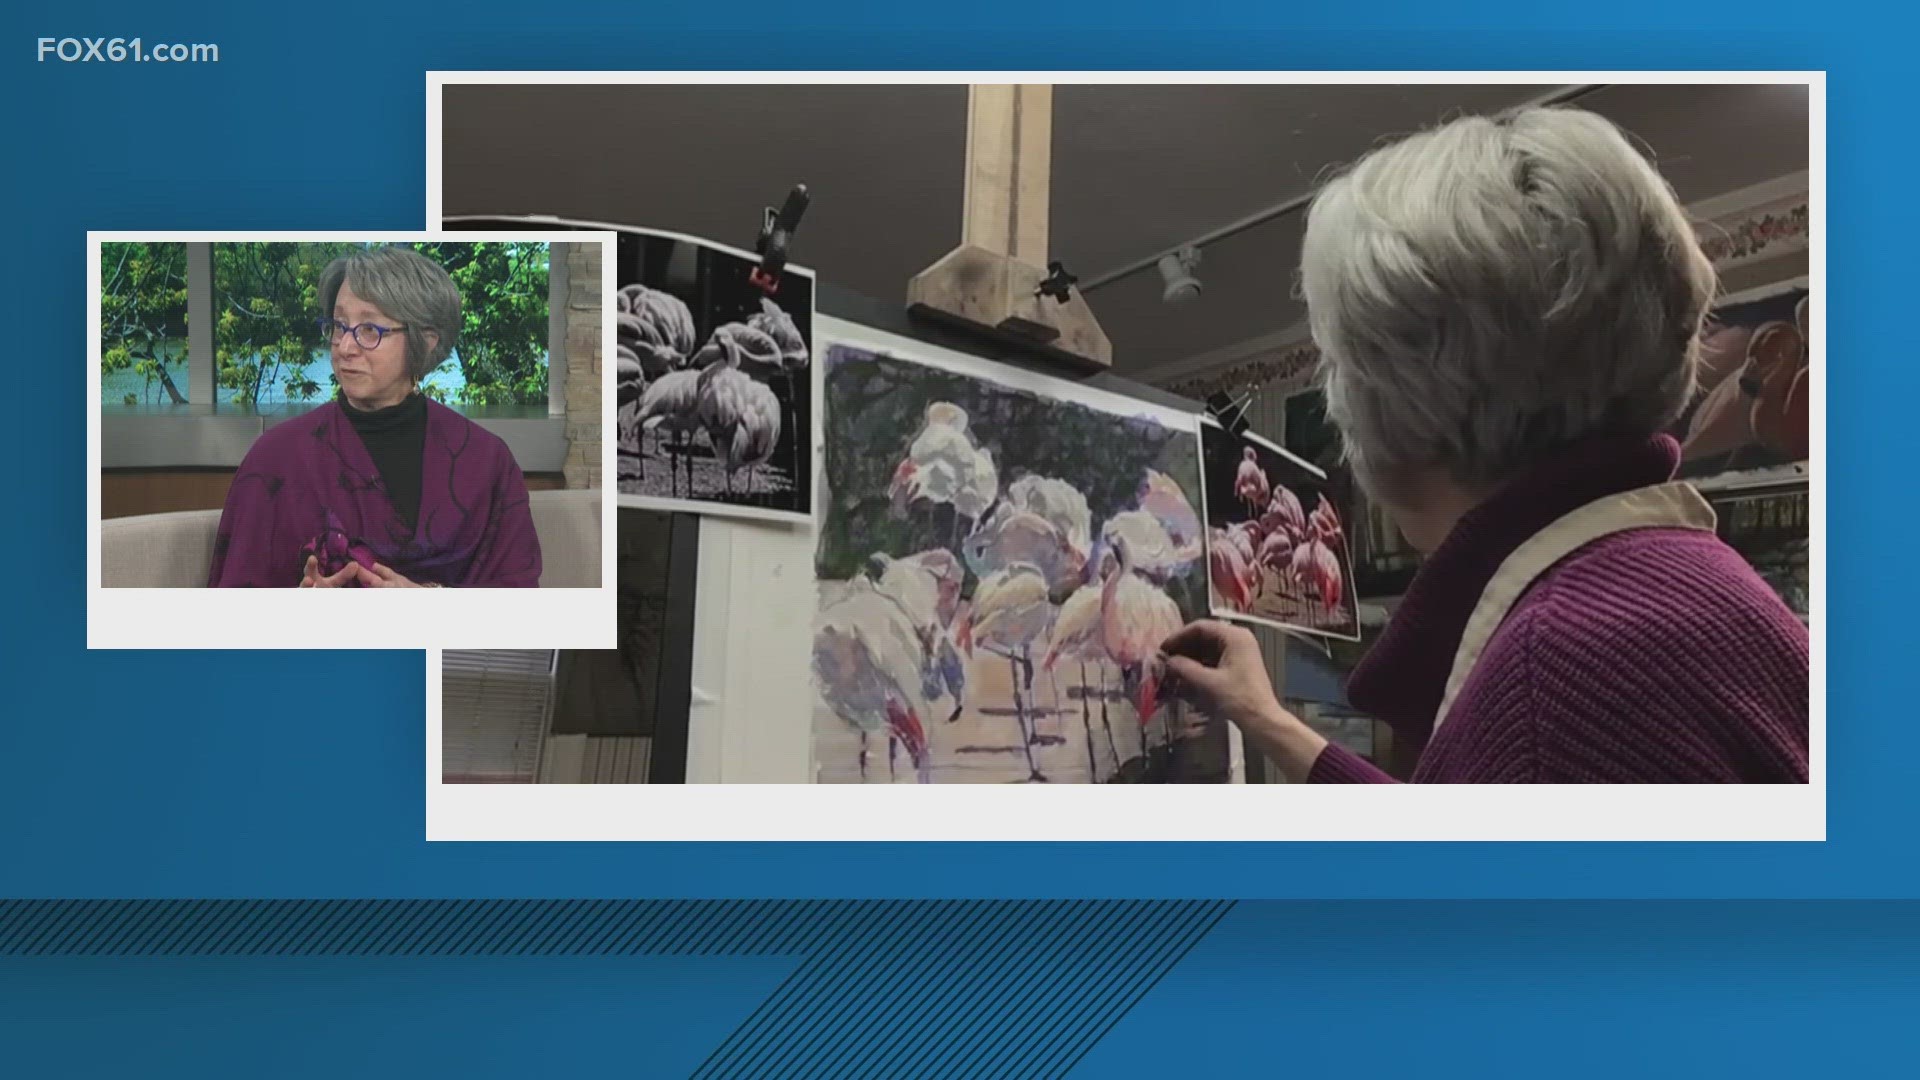 Karen Israel is an artist who specializes in pastel painting.